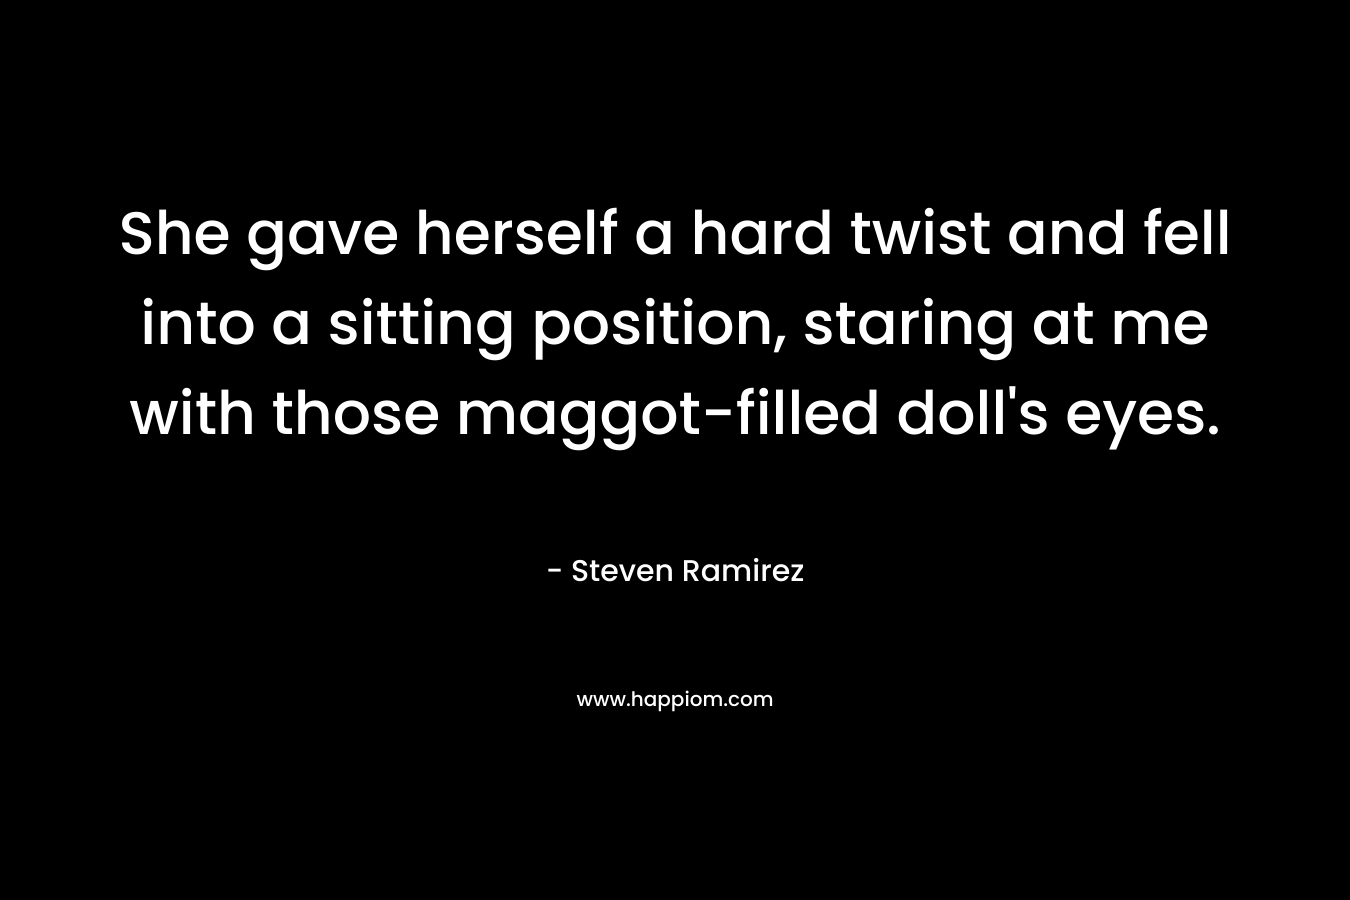 She gave herself a hard twist and fell into a sitting position, staring at me with those maggot-filled doll’s eyes. – Steven Ramirez